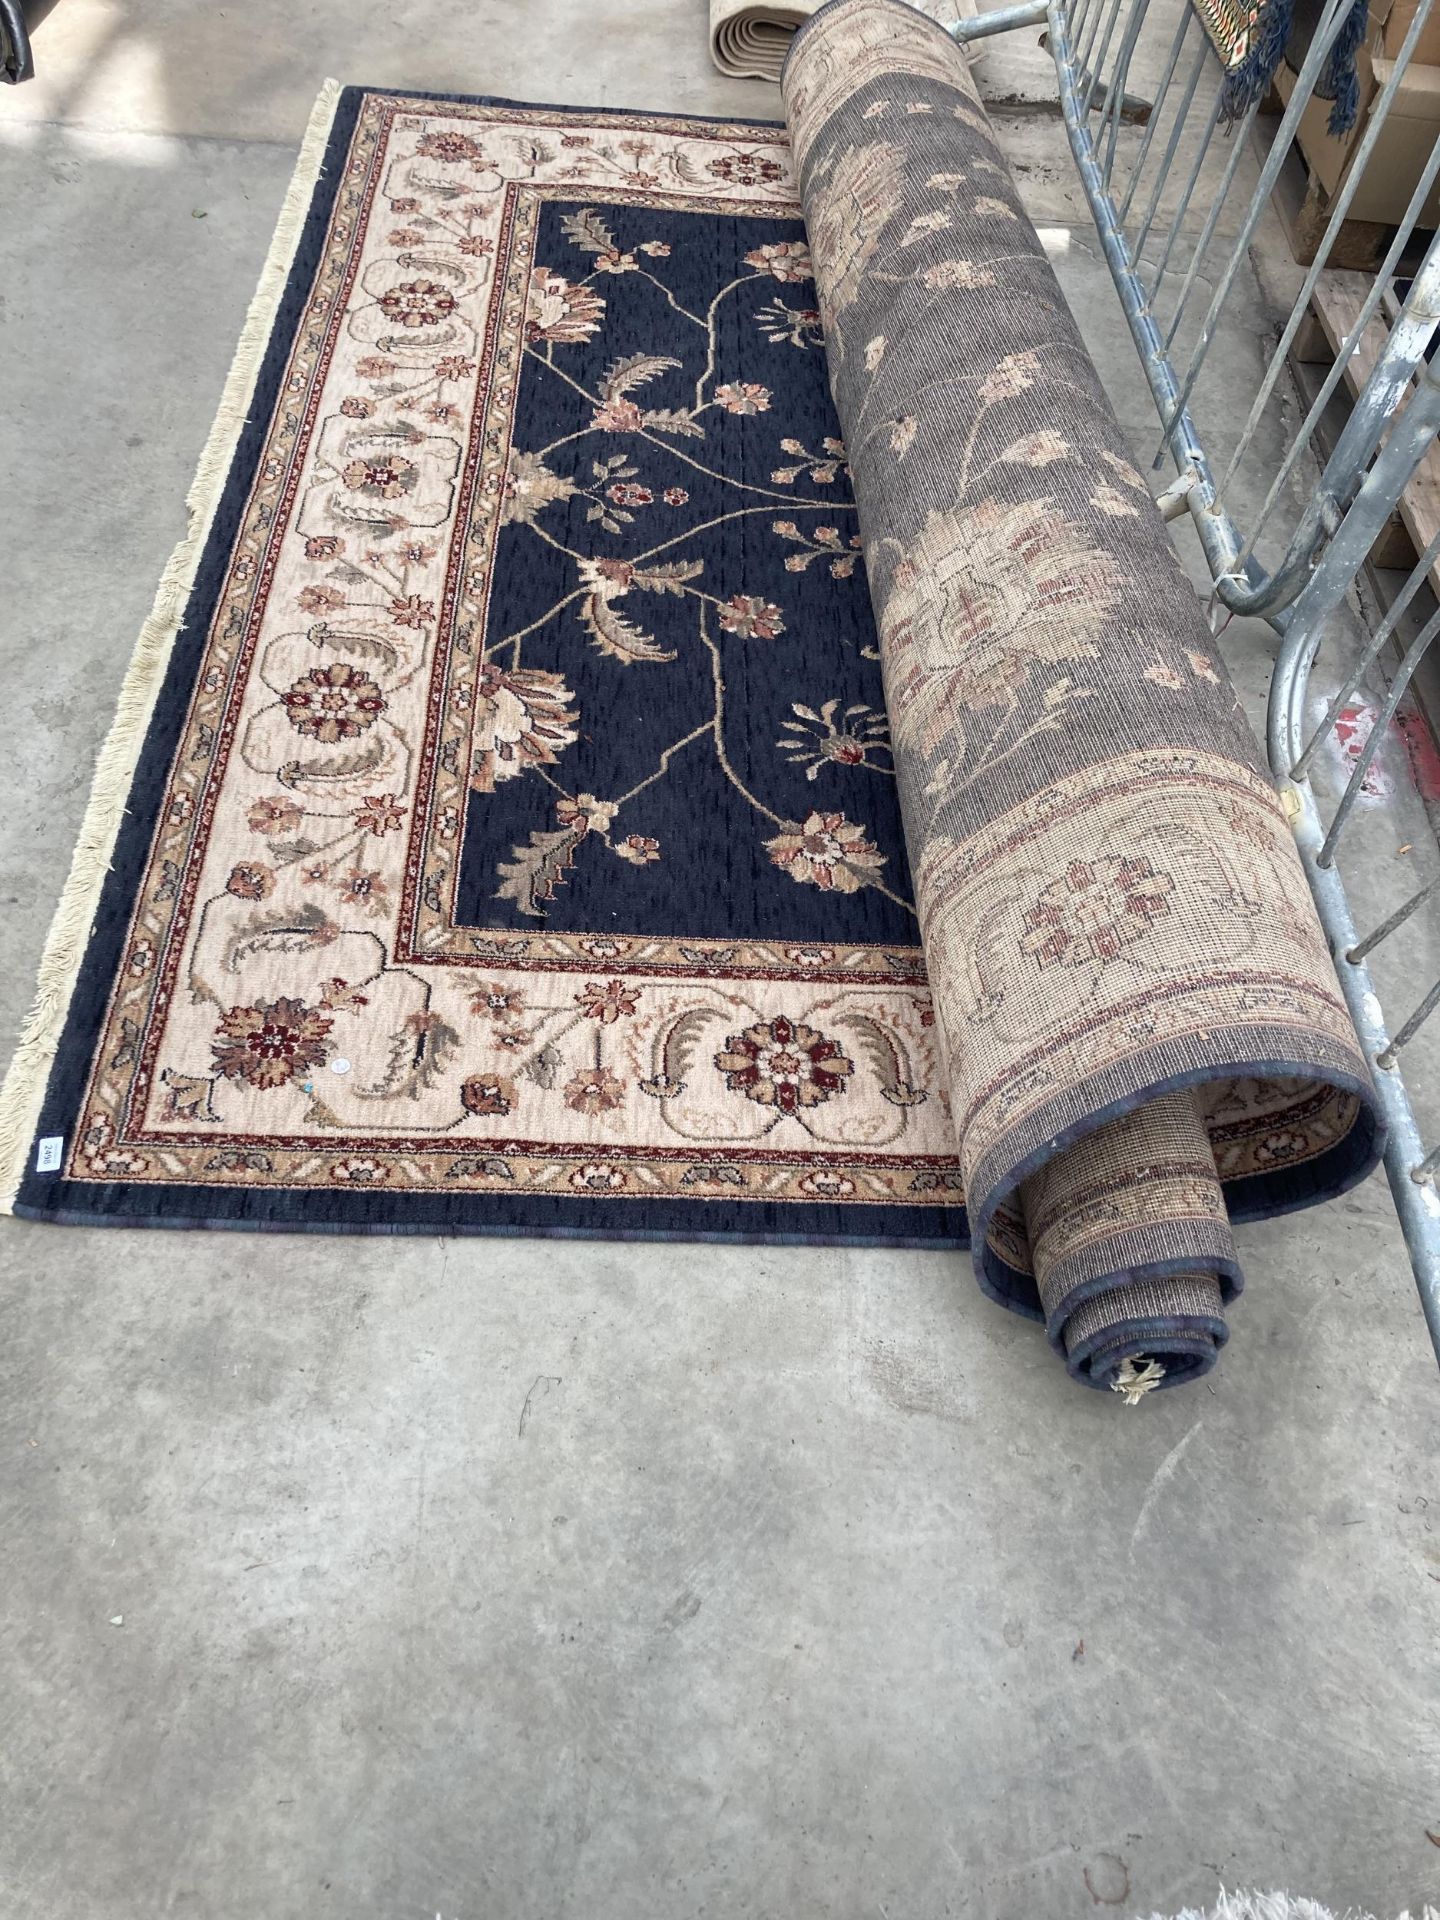 A LARGE BLACK AND CREAM PATTERNED RUG - Image 2 of 2